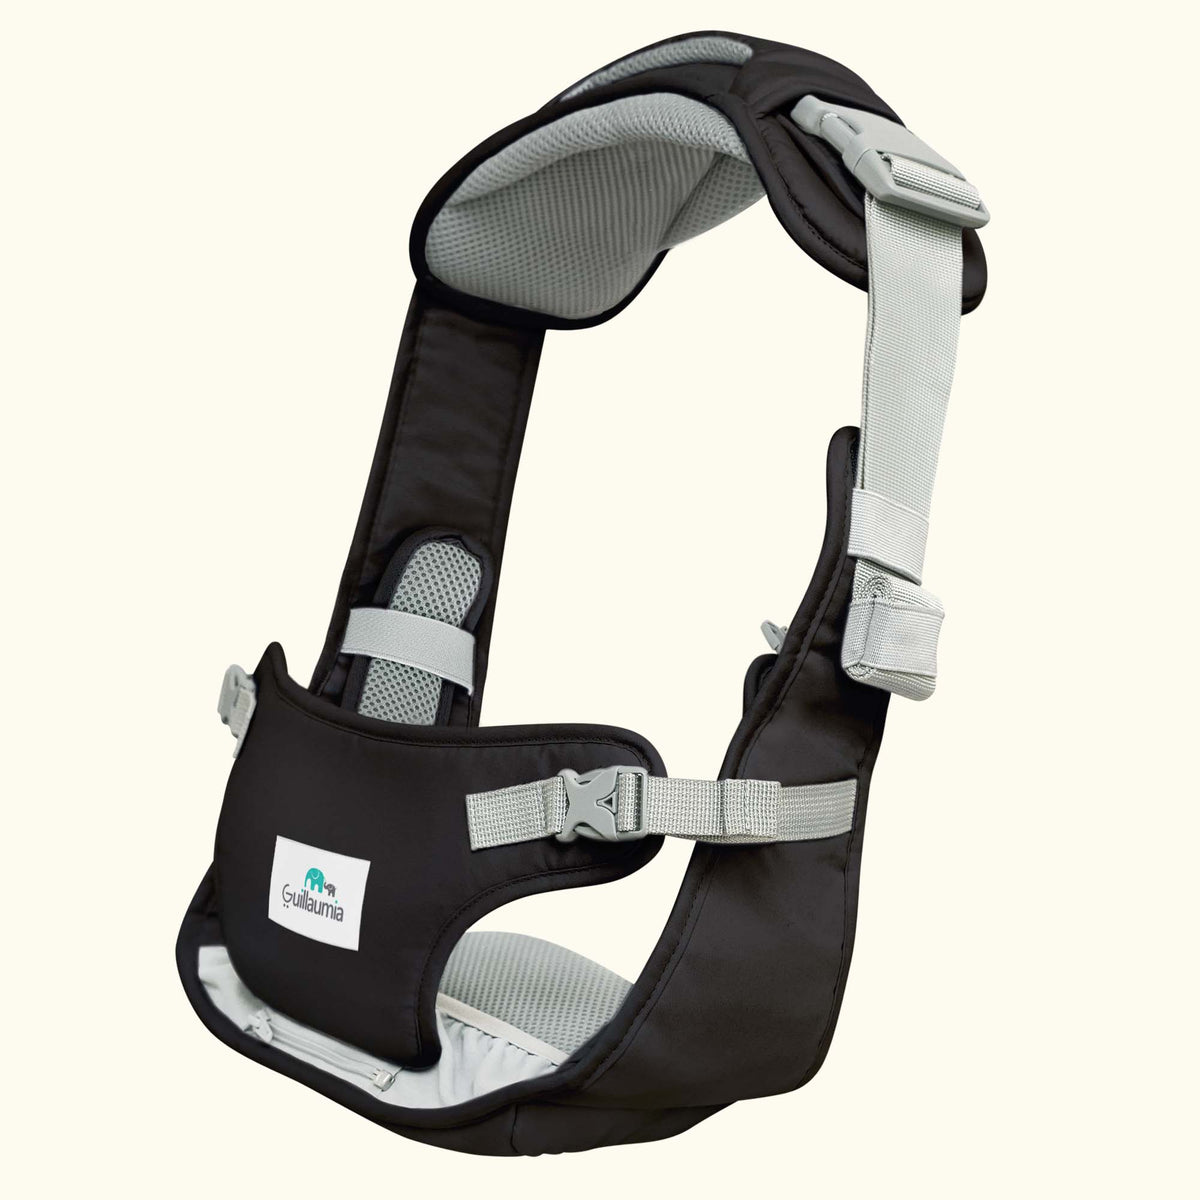 Pick-Me-Up cross body baby carrier in charcoal grey